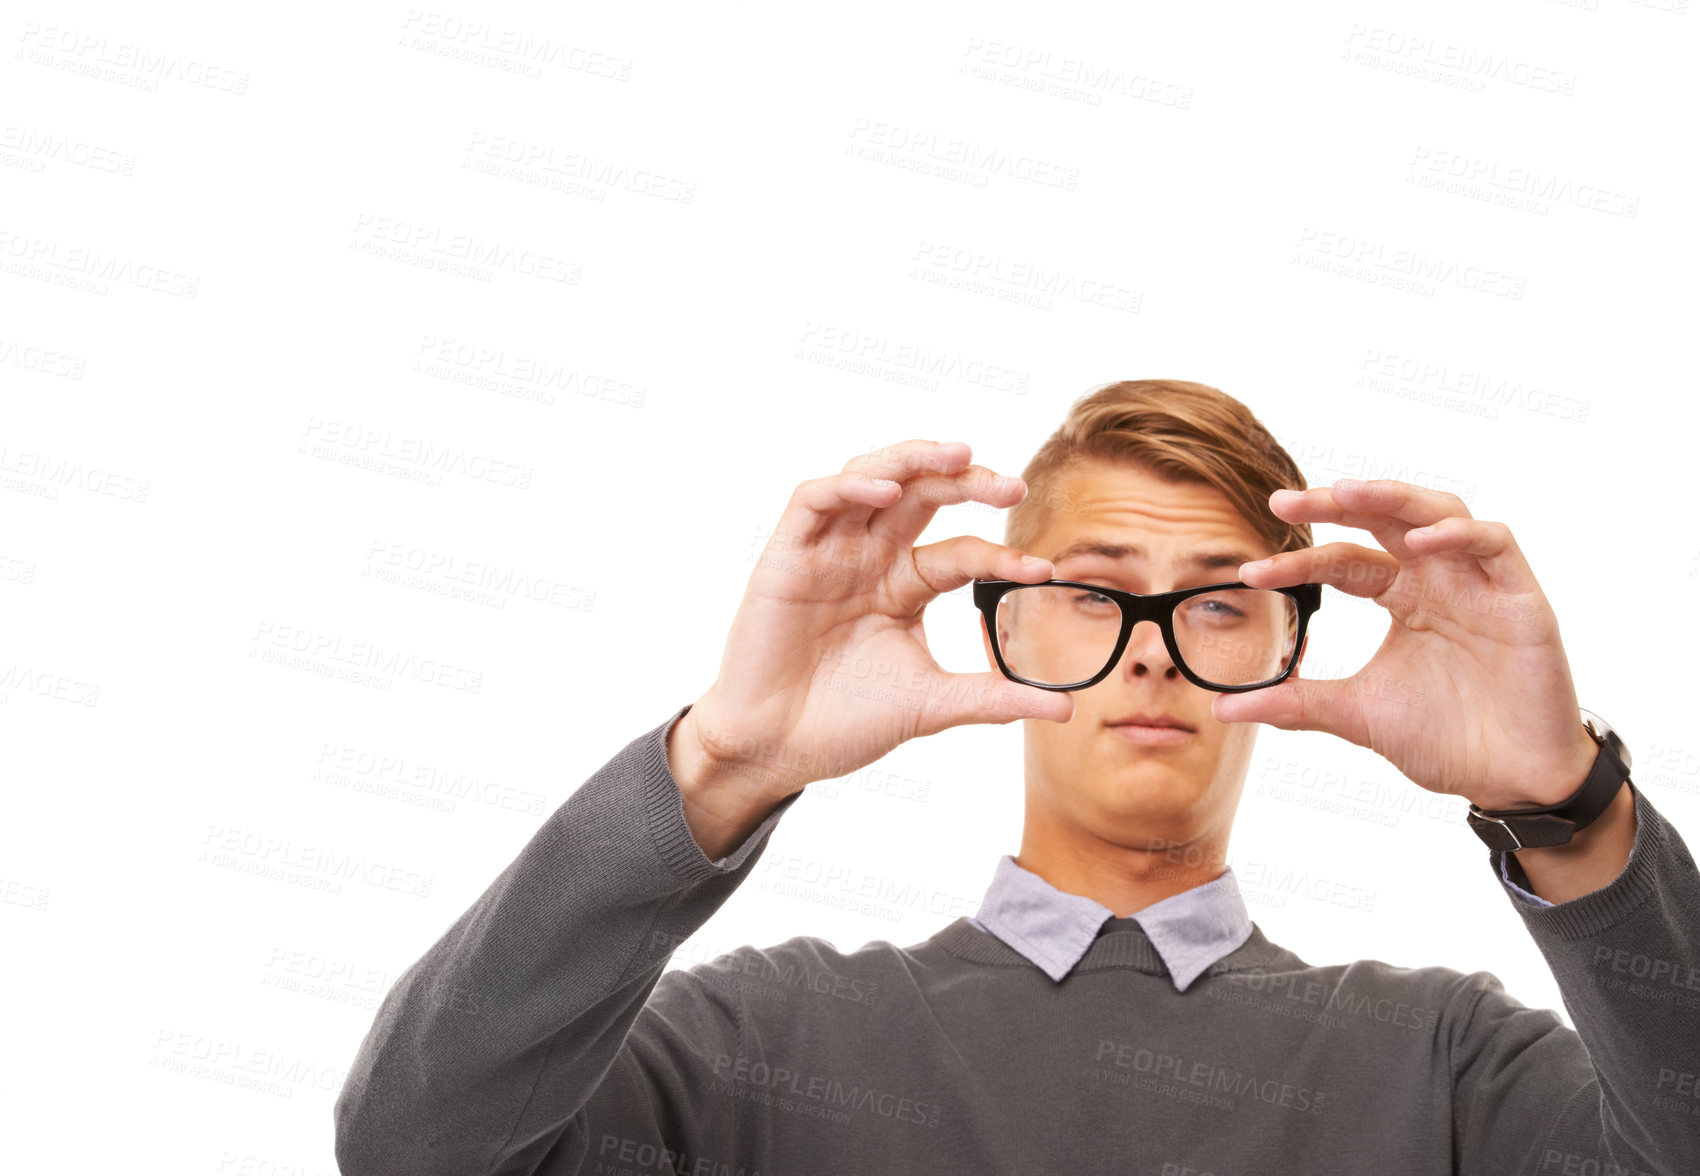 Buy stock photo Studio shot of a young man squinting through a pair of glasses while isolated on white